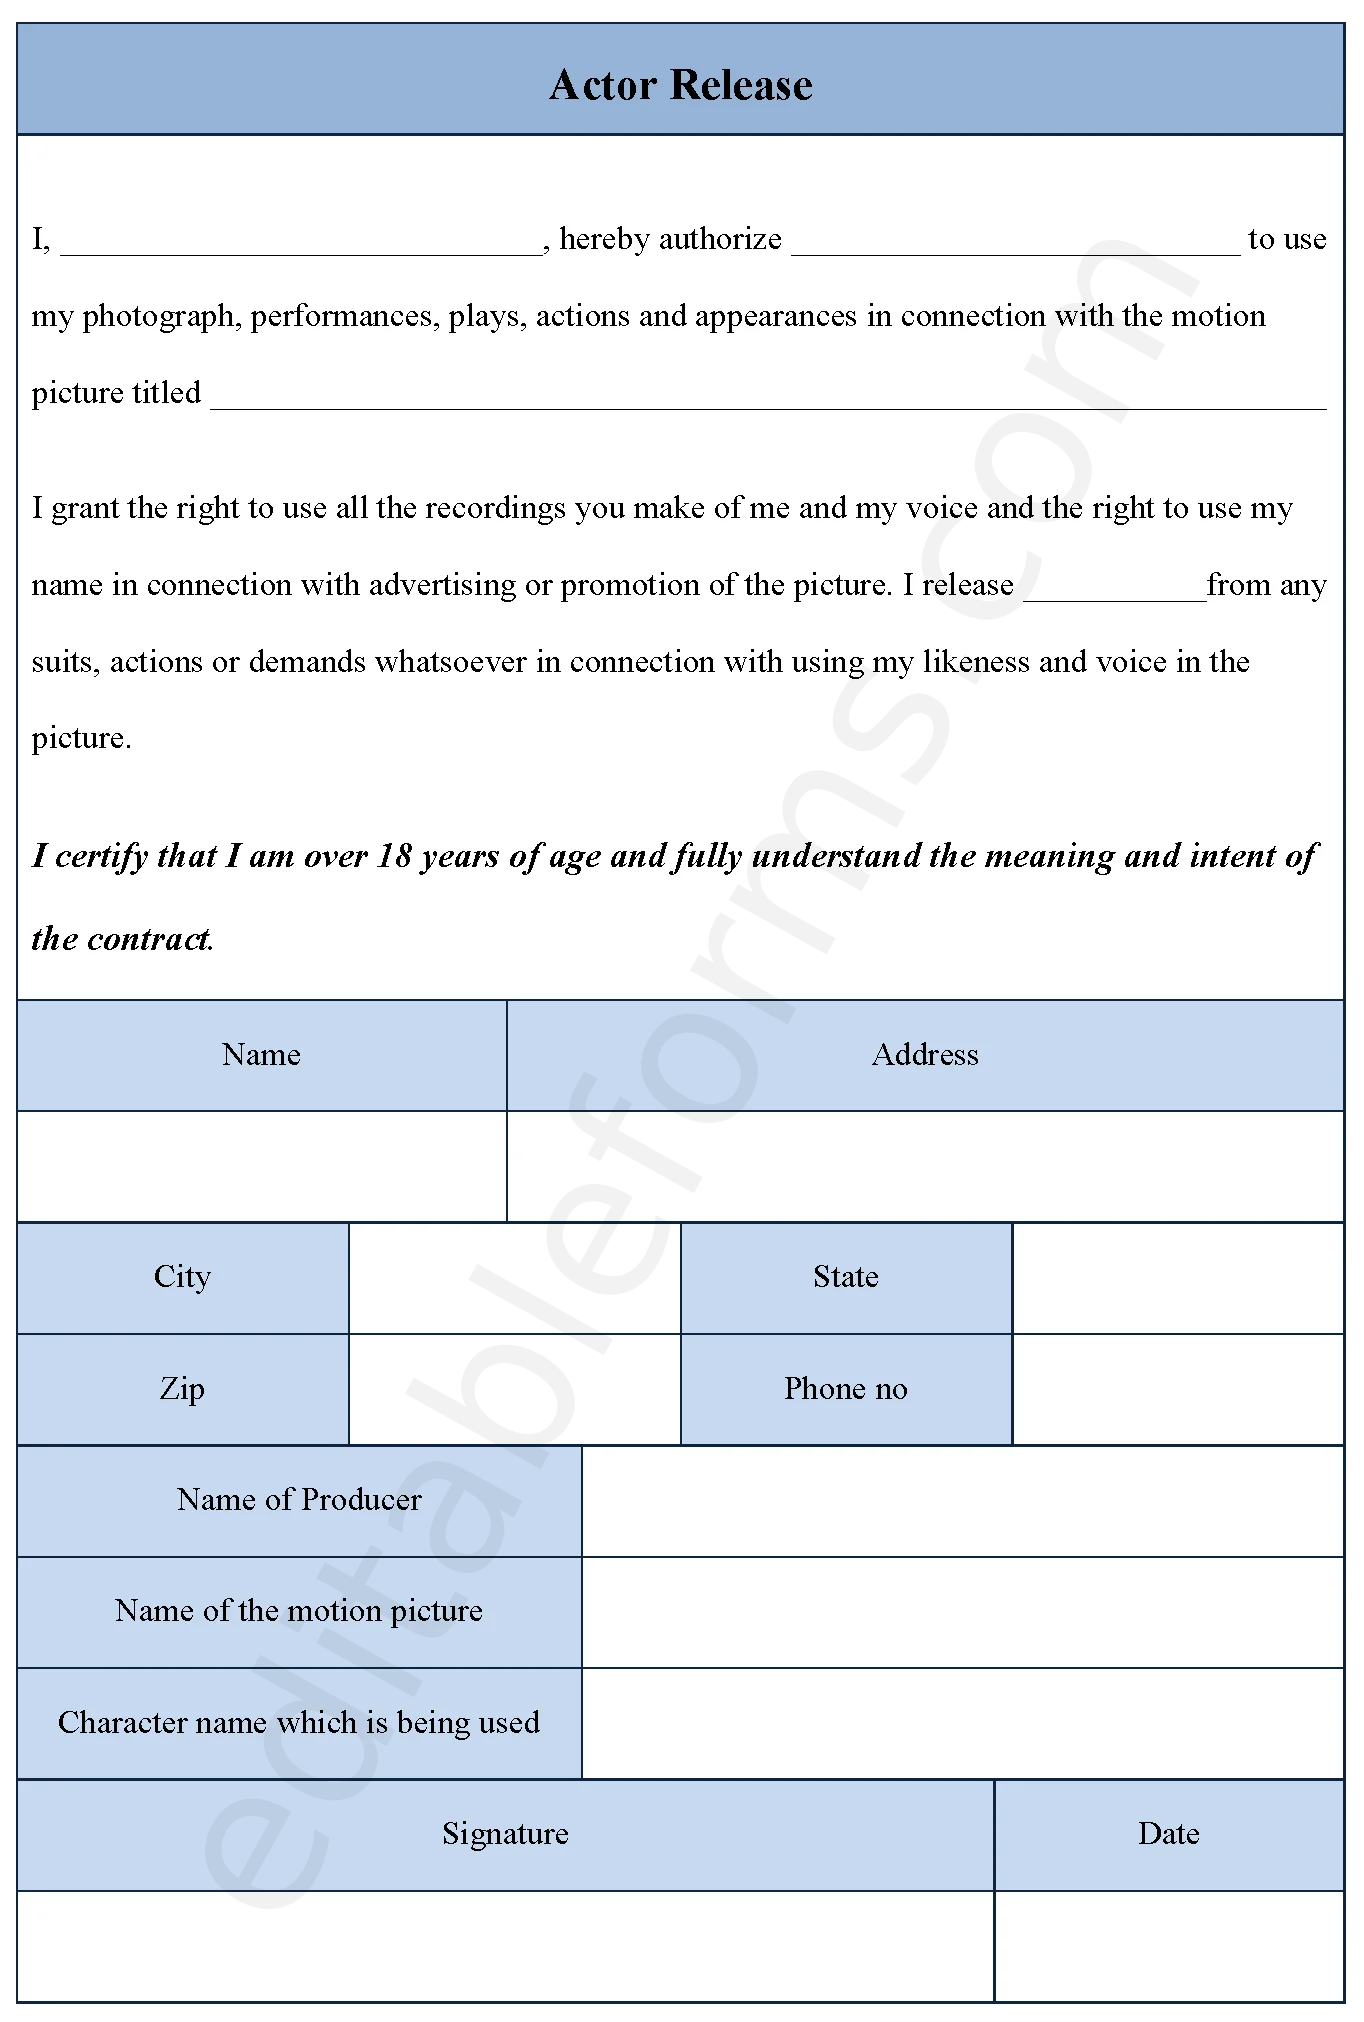 Actor Release Fillable PDF Template